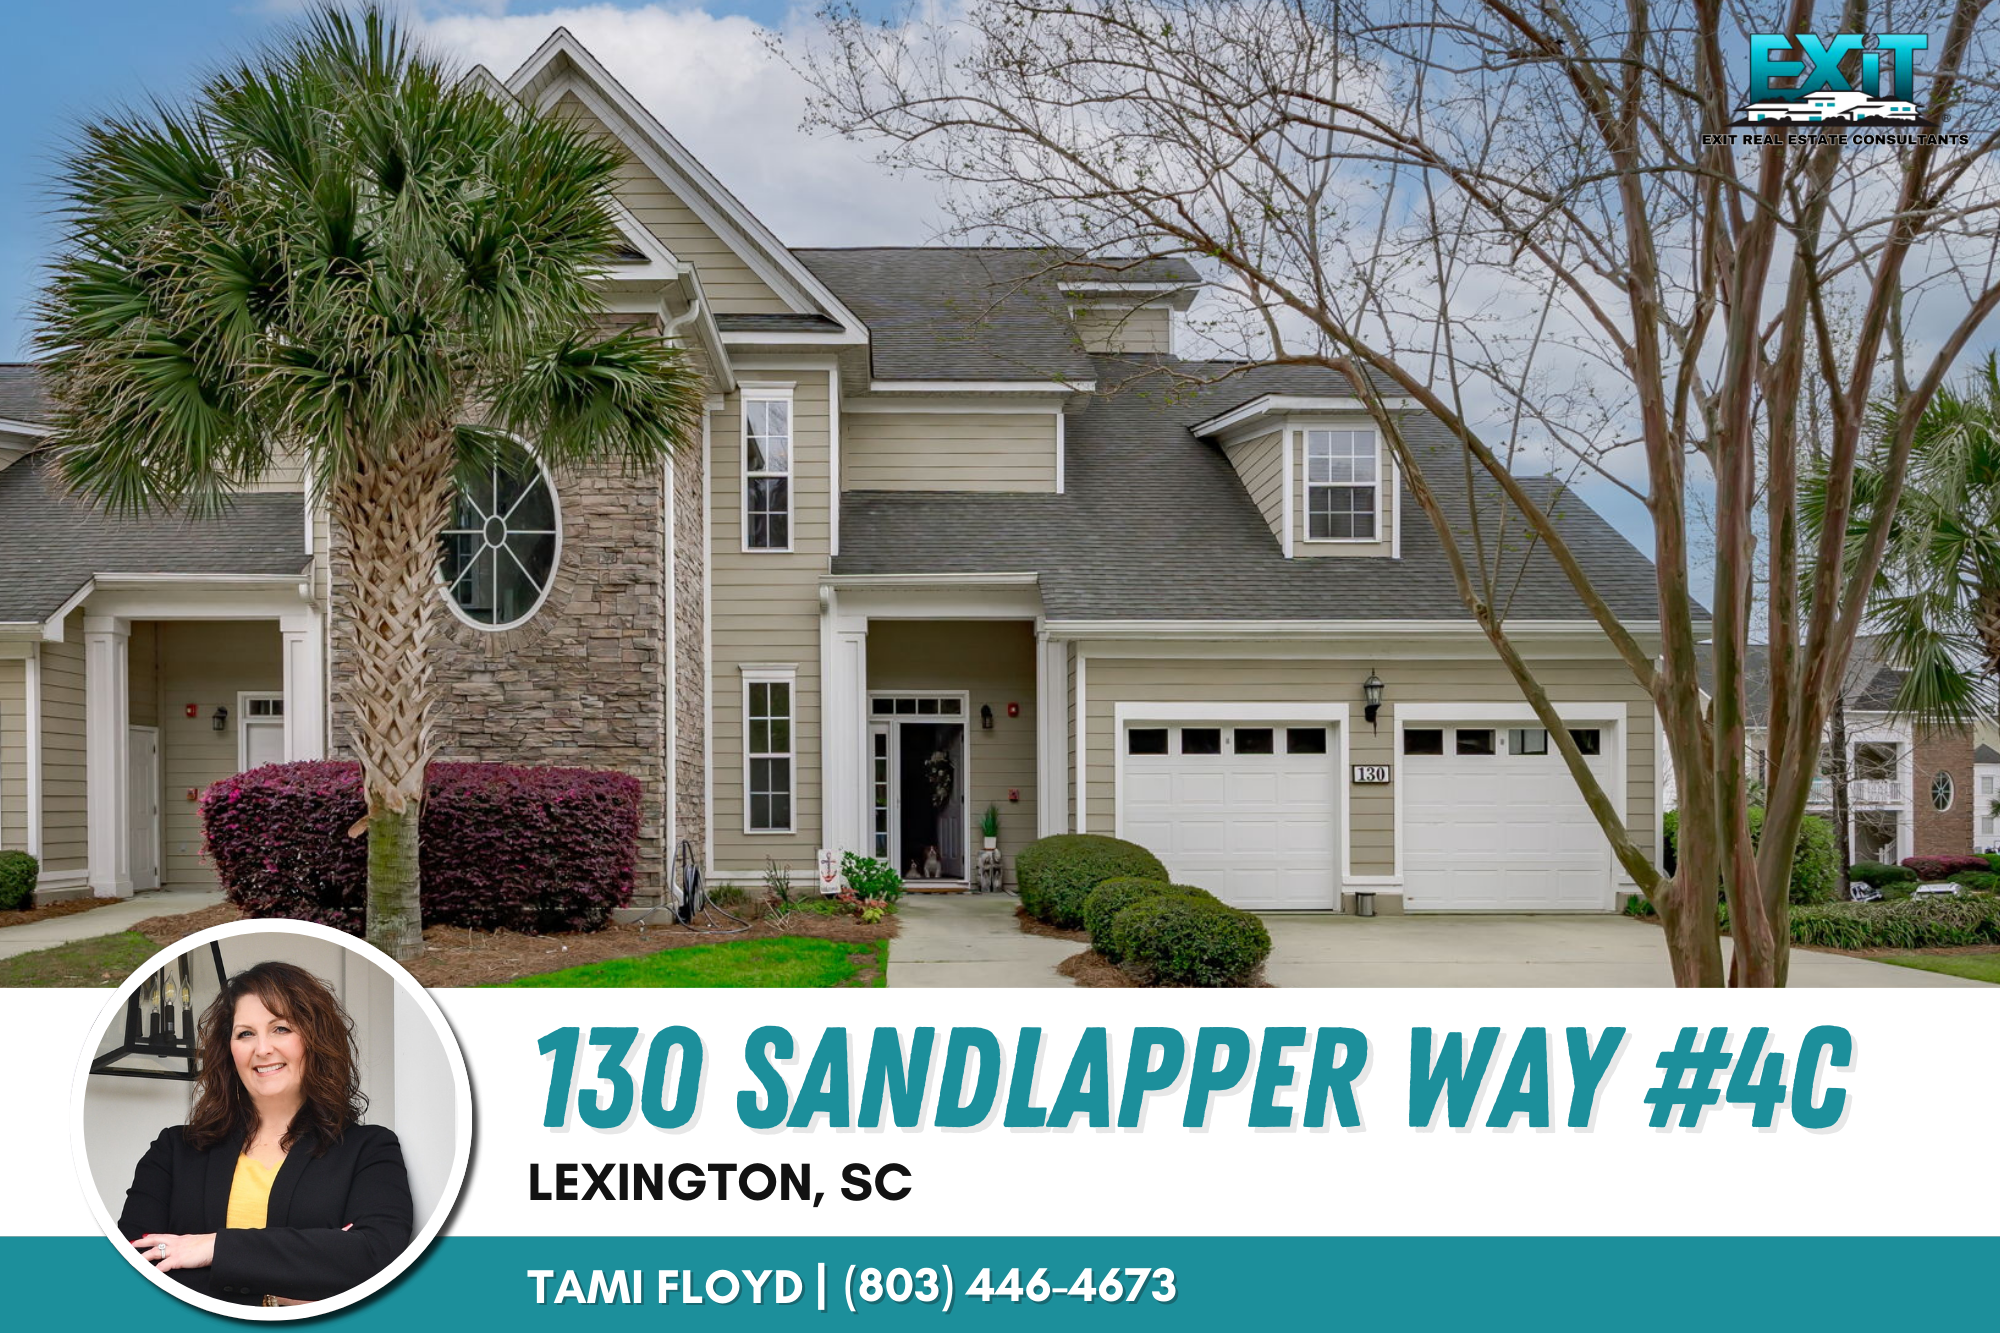 Just listed in Hammock Bay